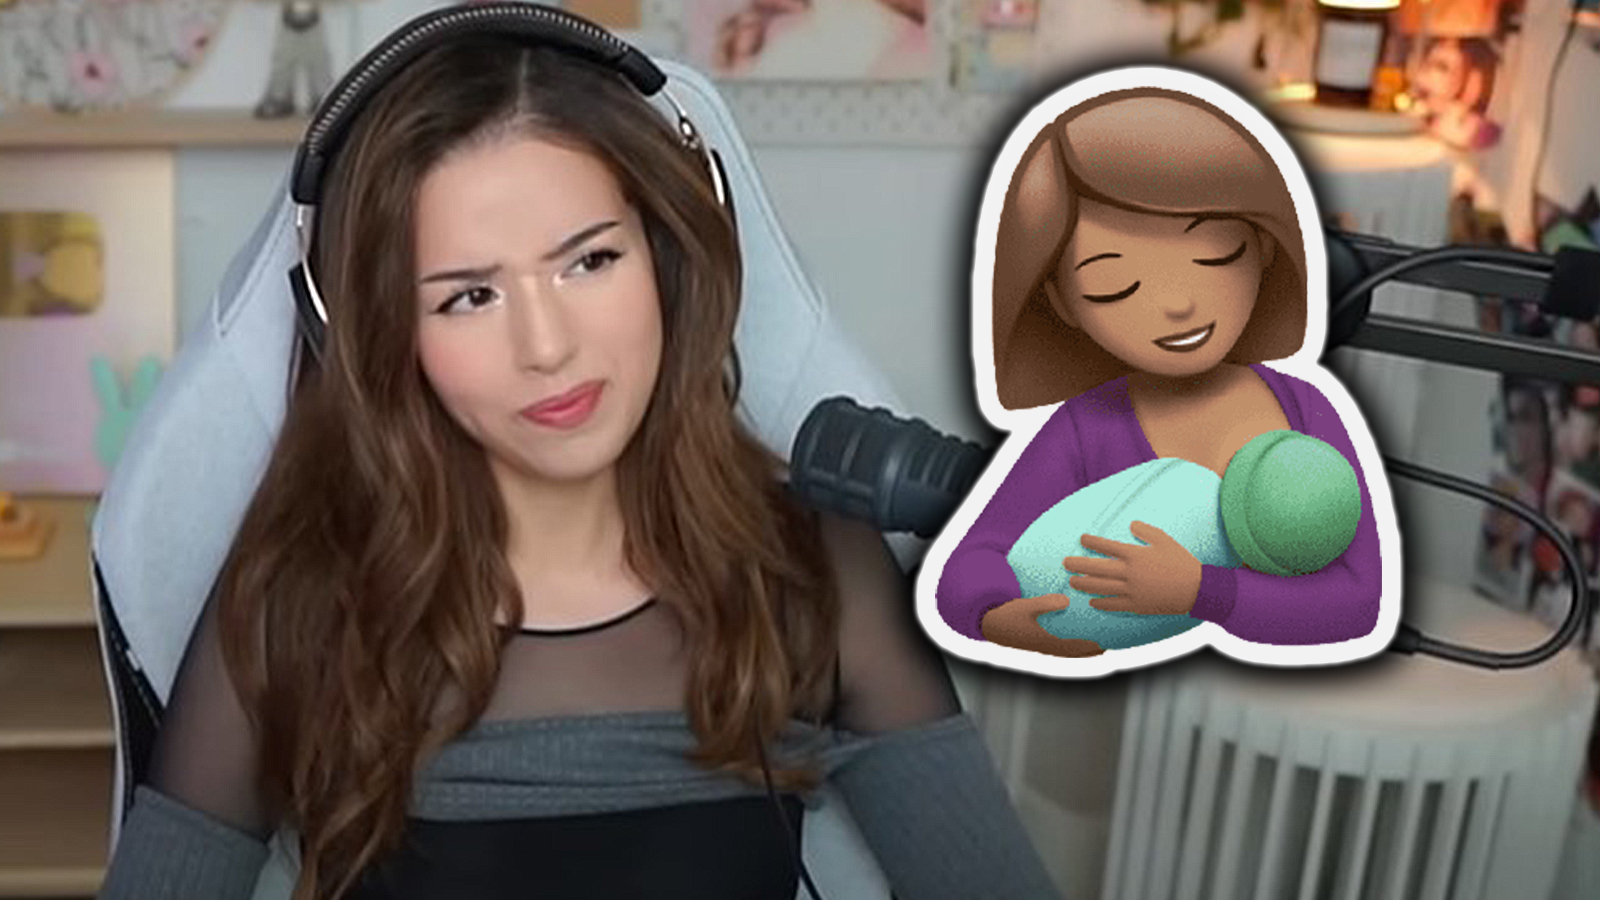 Pokimane claps back at “weird” viewers asking if she's pregnant - Dexerto